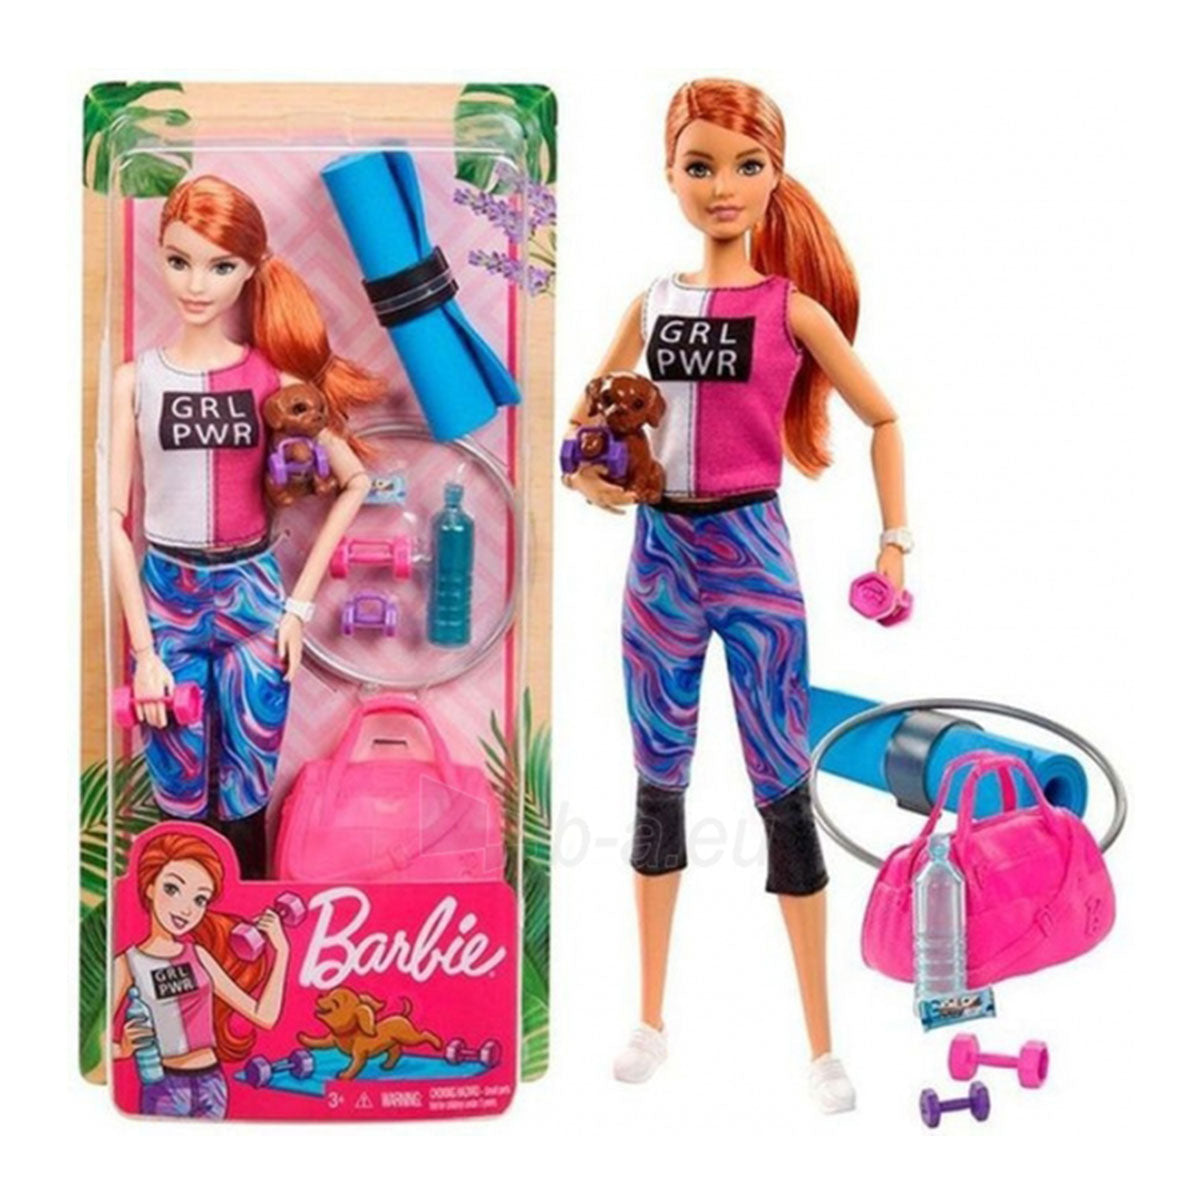 Barbie - Fitness Doll 'N Puppy – The Entertainer Pakistan